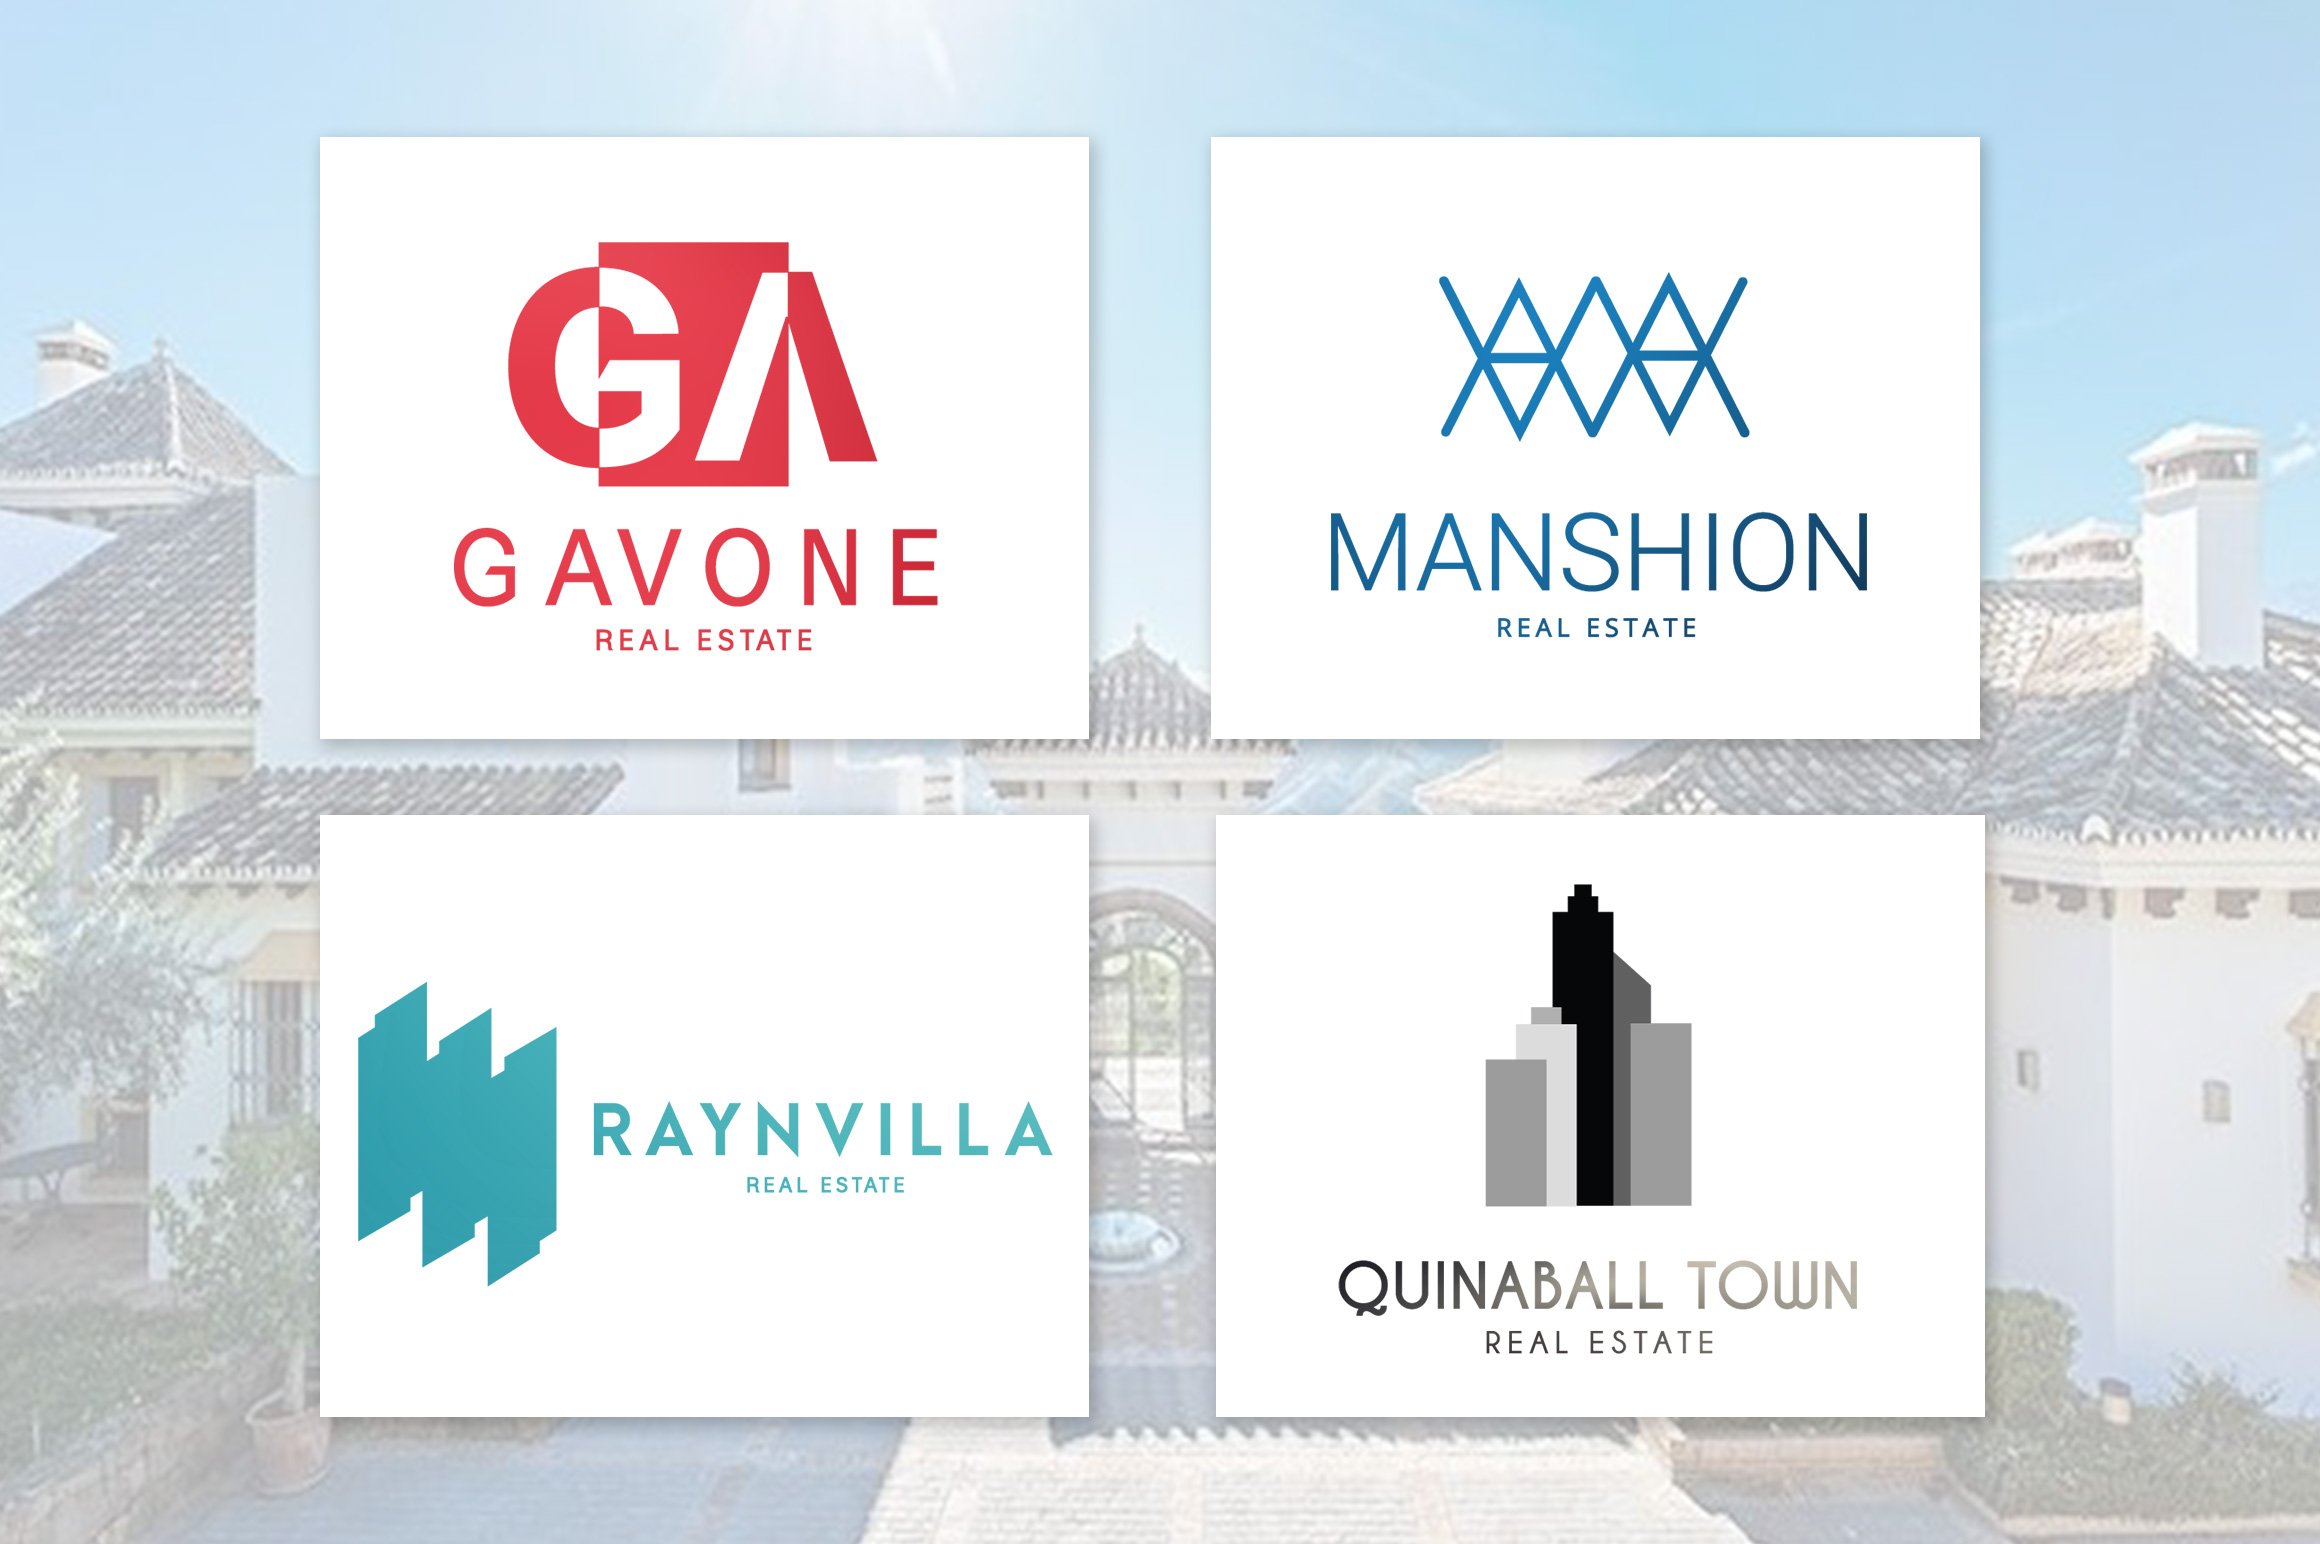 Modern real estate logos for interesting and contemporary brands.